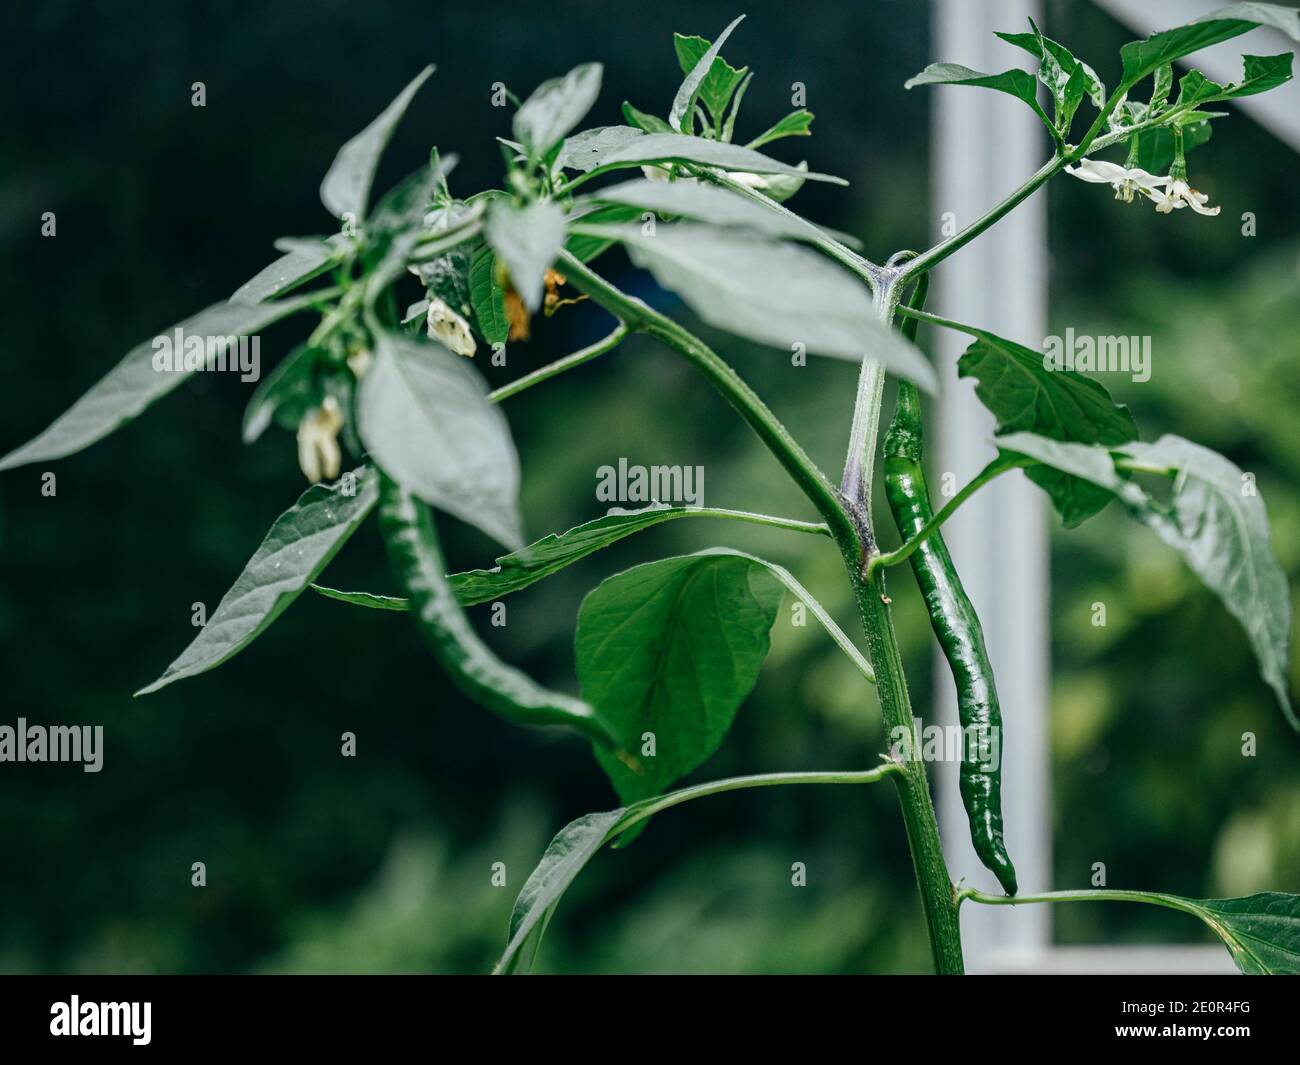 Close up of chilli plant in greenhouse with white flowers and bearing long thin green chillies Stock Photo